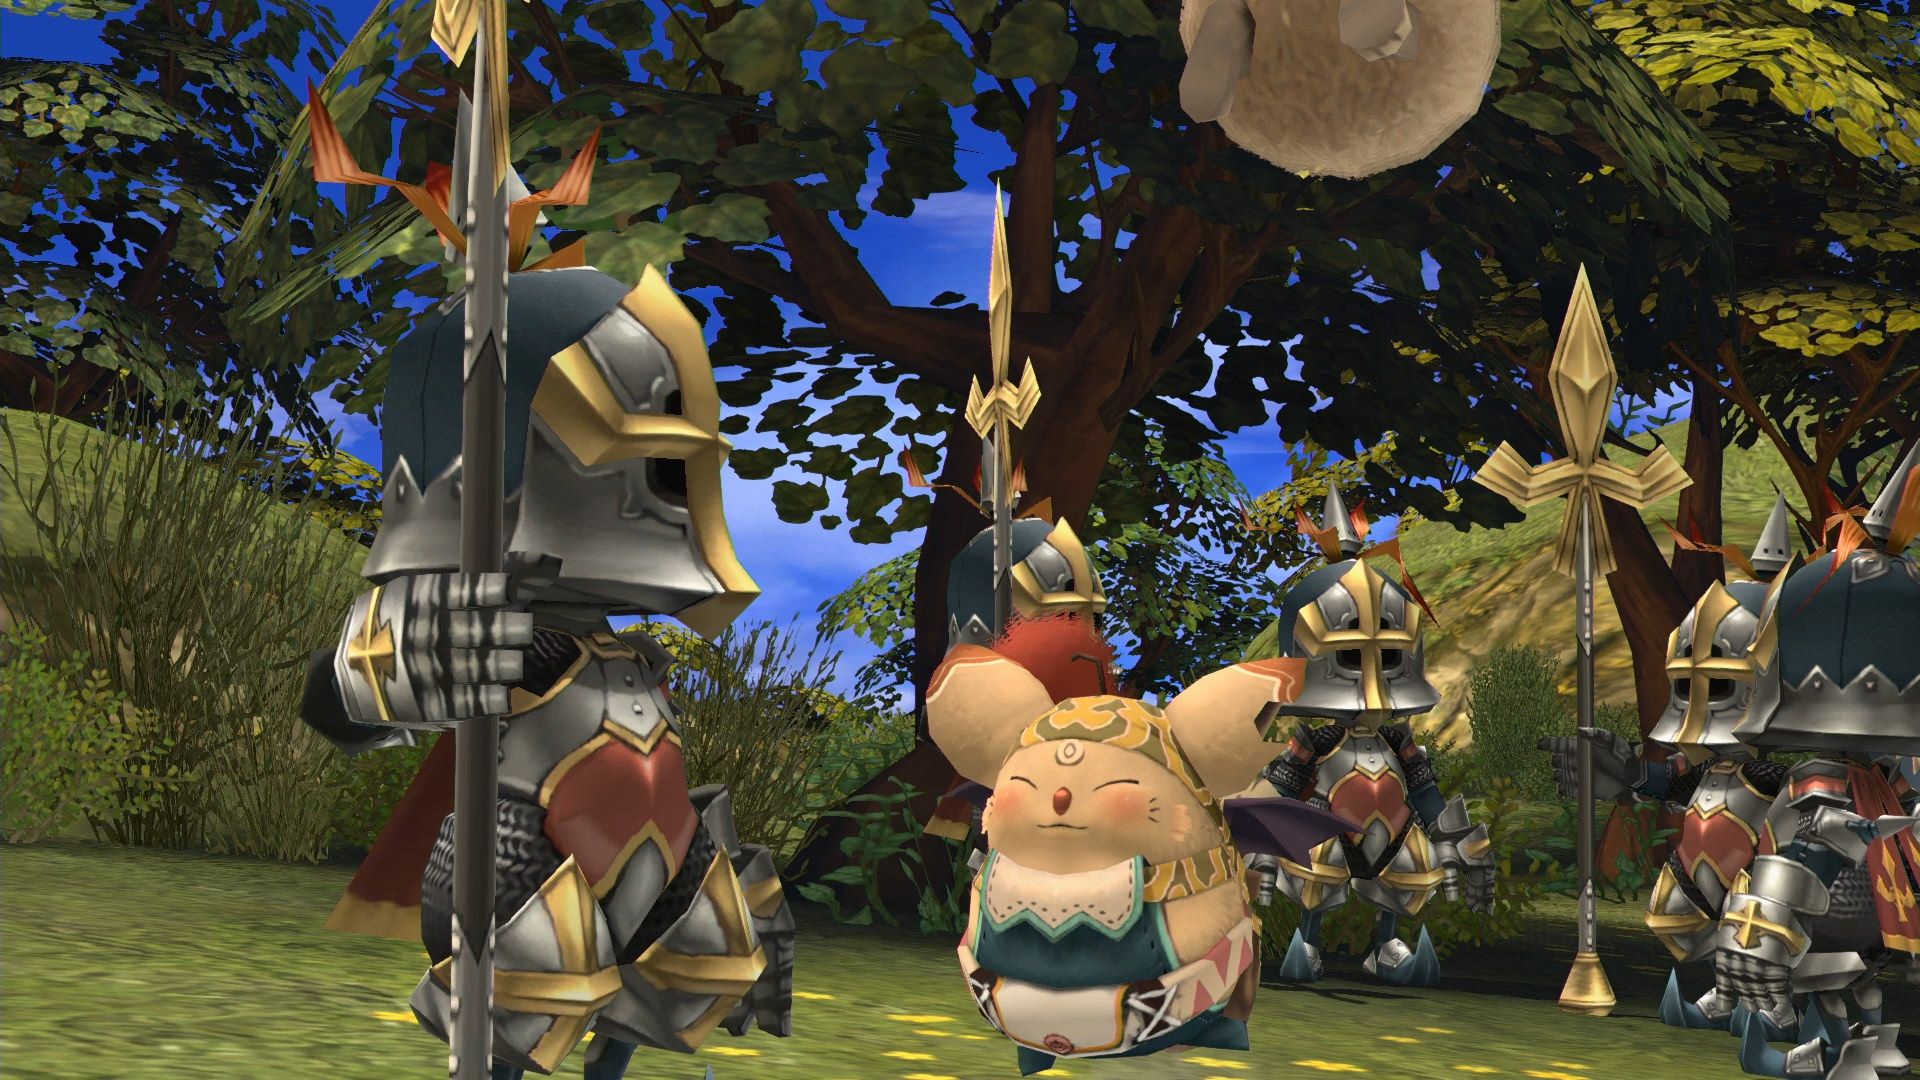 Final Fantasy Crystal Chronicles Remastered Edition does not support local offline multiplayer